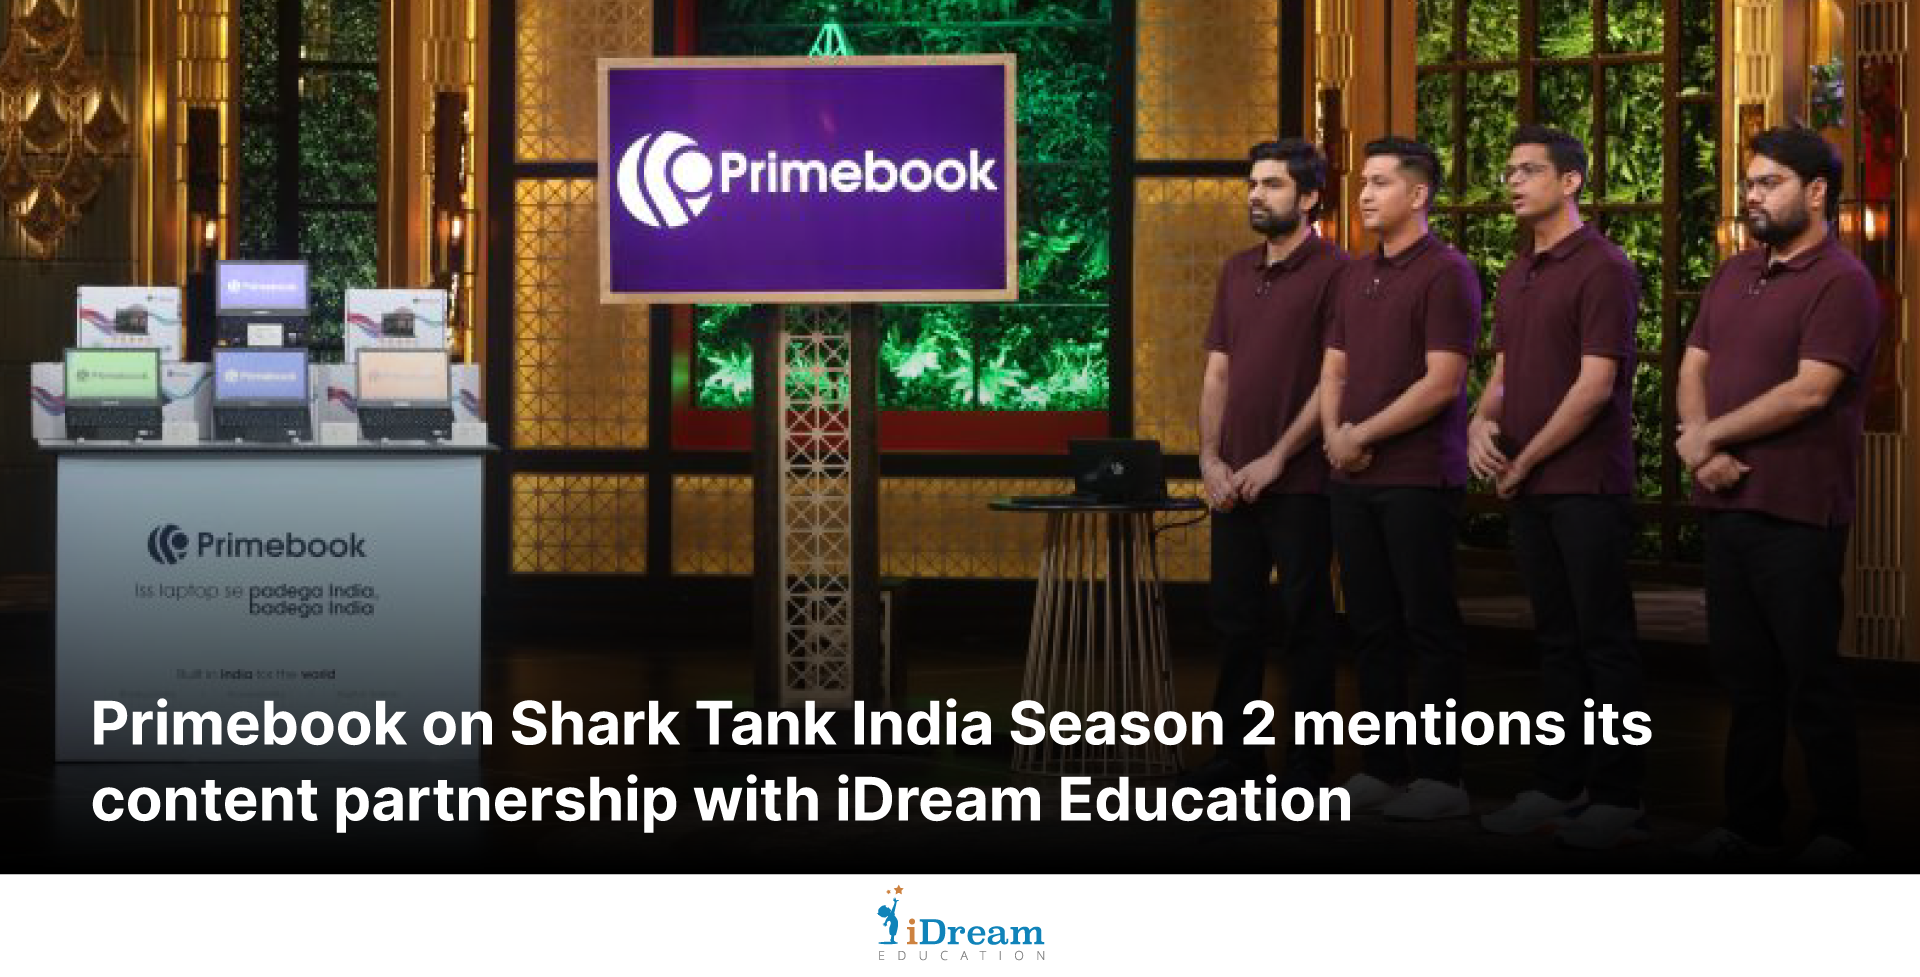 Primebook Founders Calling out iDream Education's iPrep app as Content Partner for their Android based laptop on Shark Tank